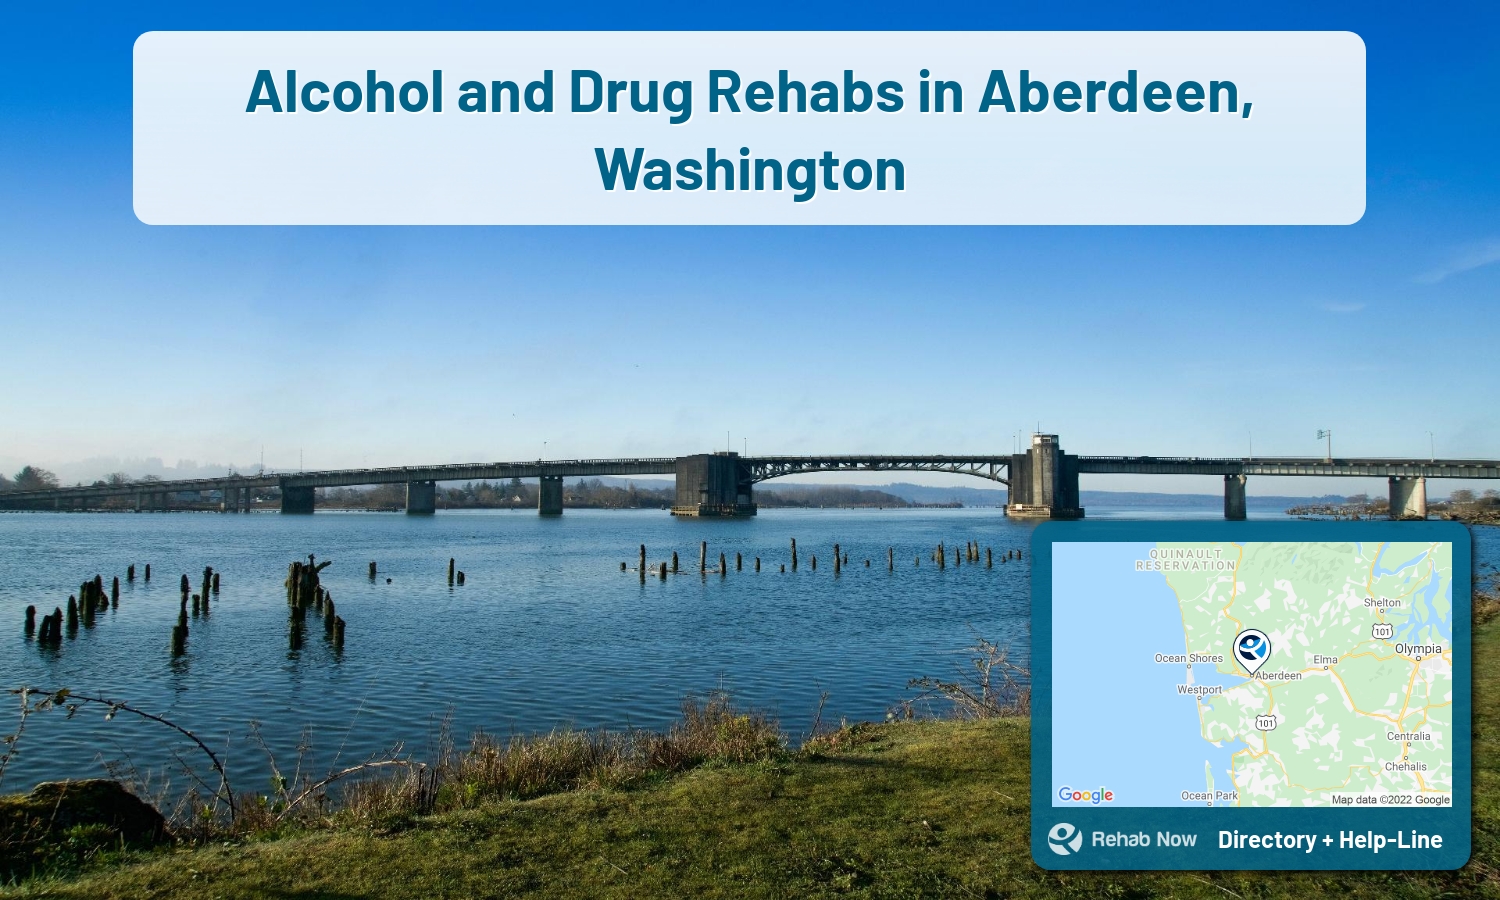 Aberdeen, WA Treatment Centers. Find drug rehab in Aberdeen, Washington, or detox and treatment programs. Get the right help now!